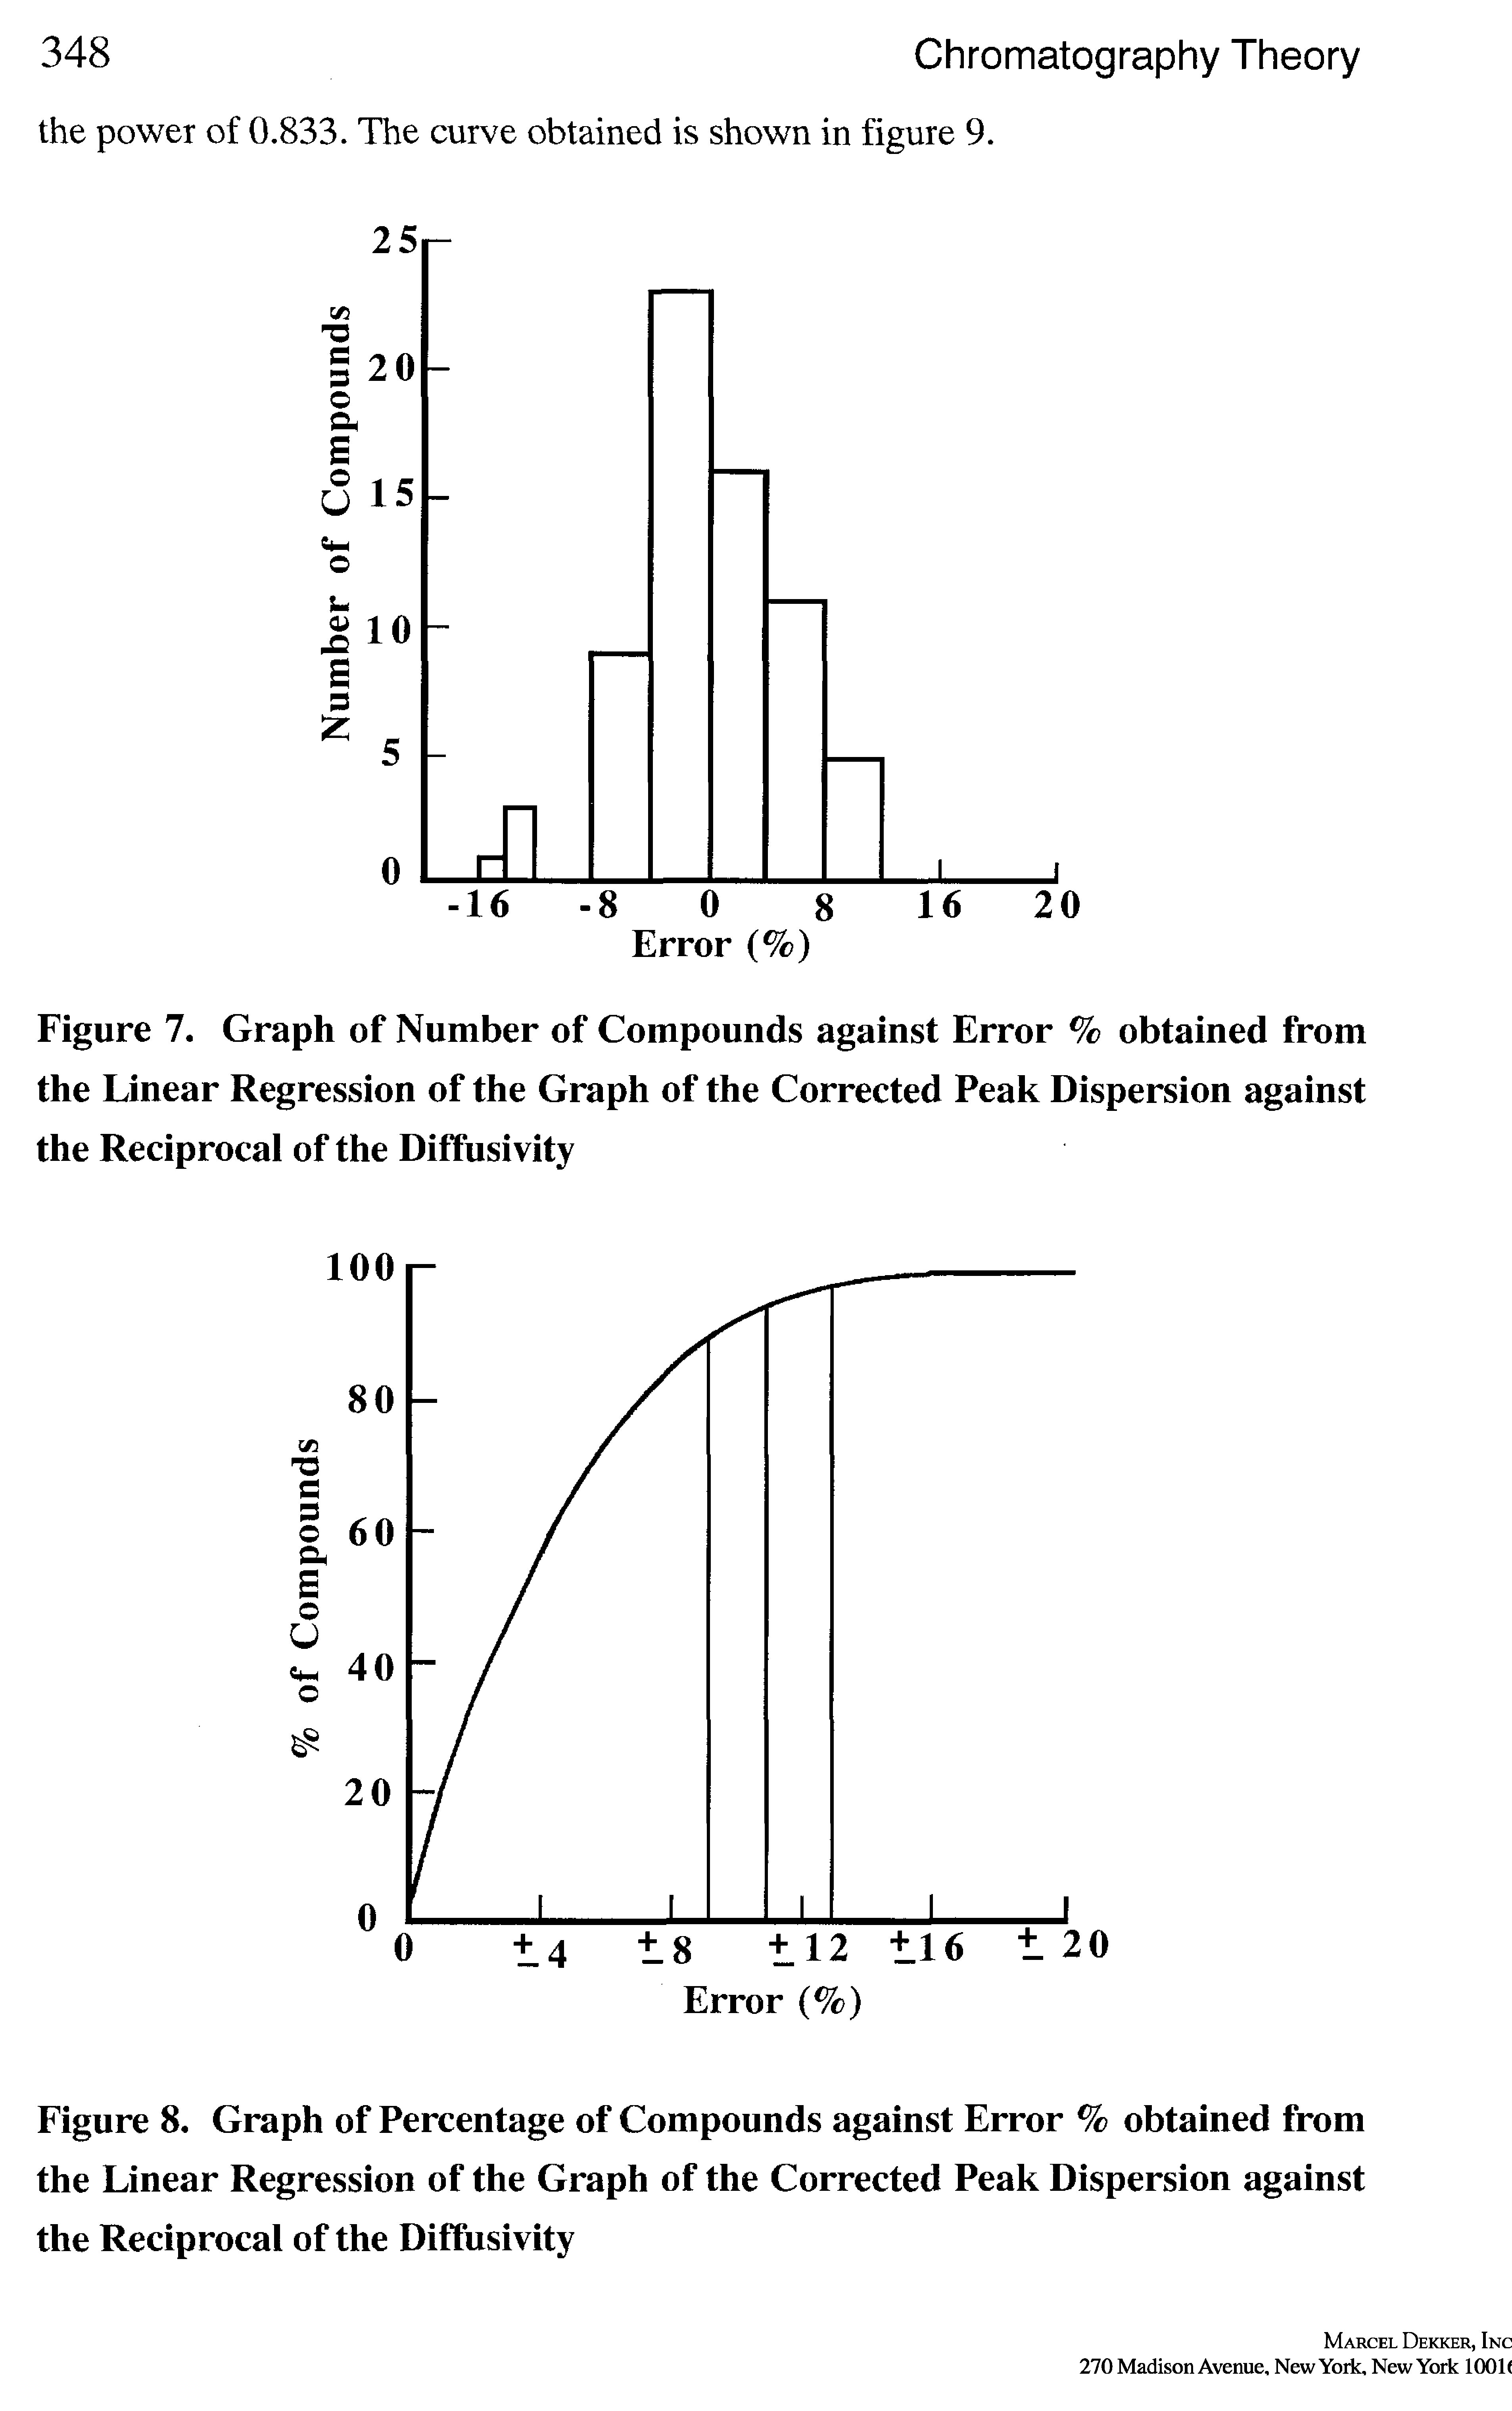 Figure 7. Graph of Number of Compounds against Error % obtained from the Linear Regression of the Graph of the Corrected Peak Dispersion against the Reciprocal of the Diffusivity...